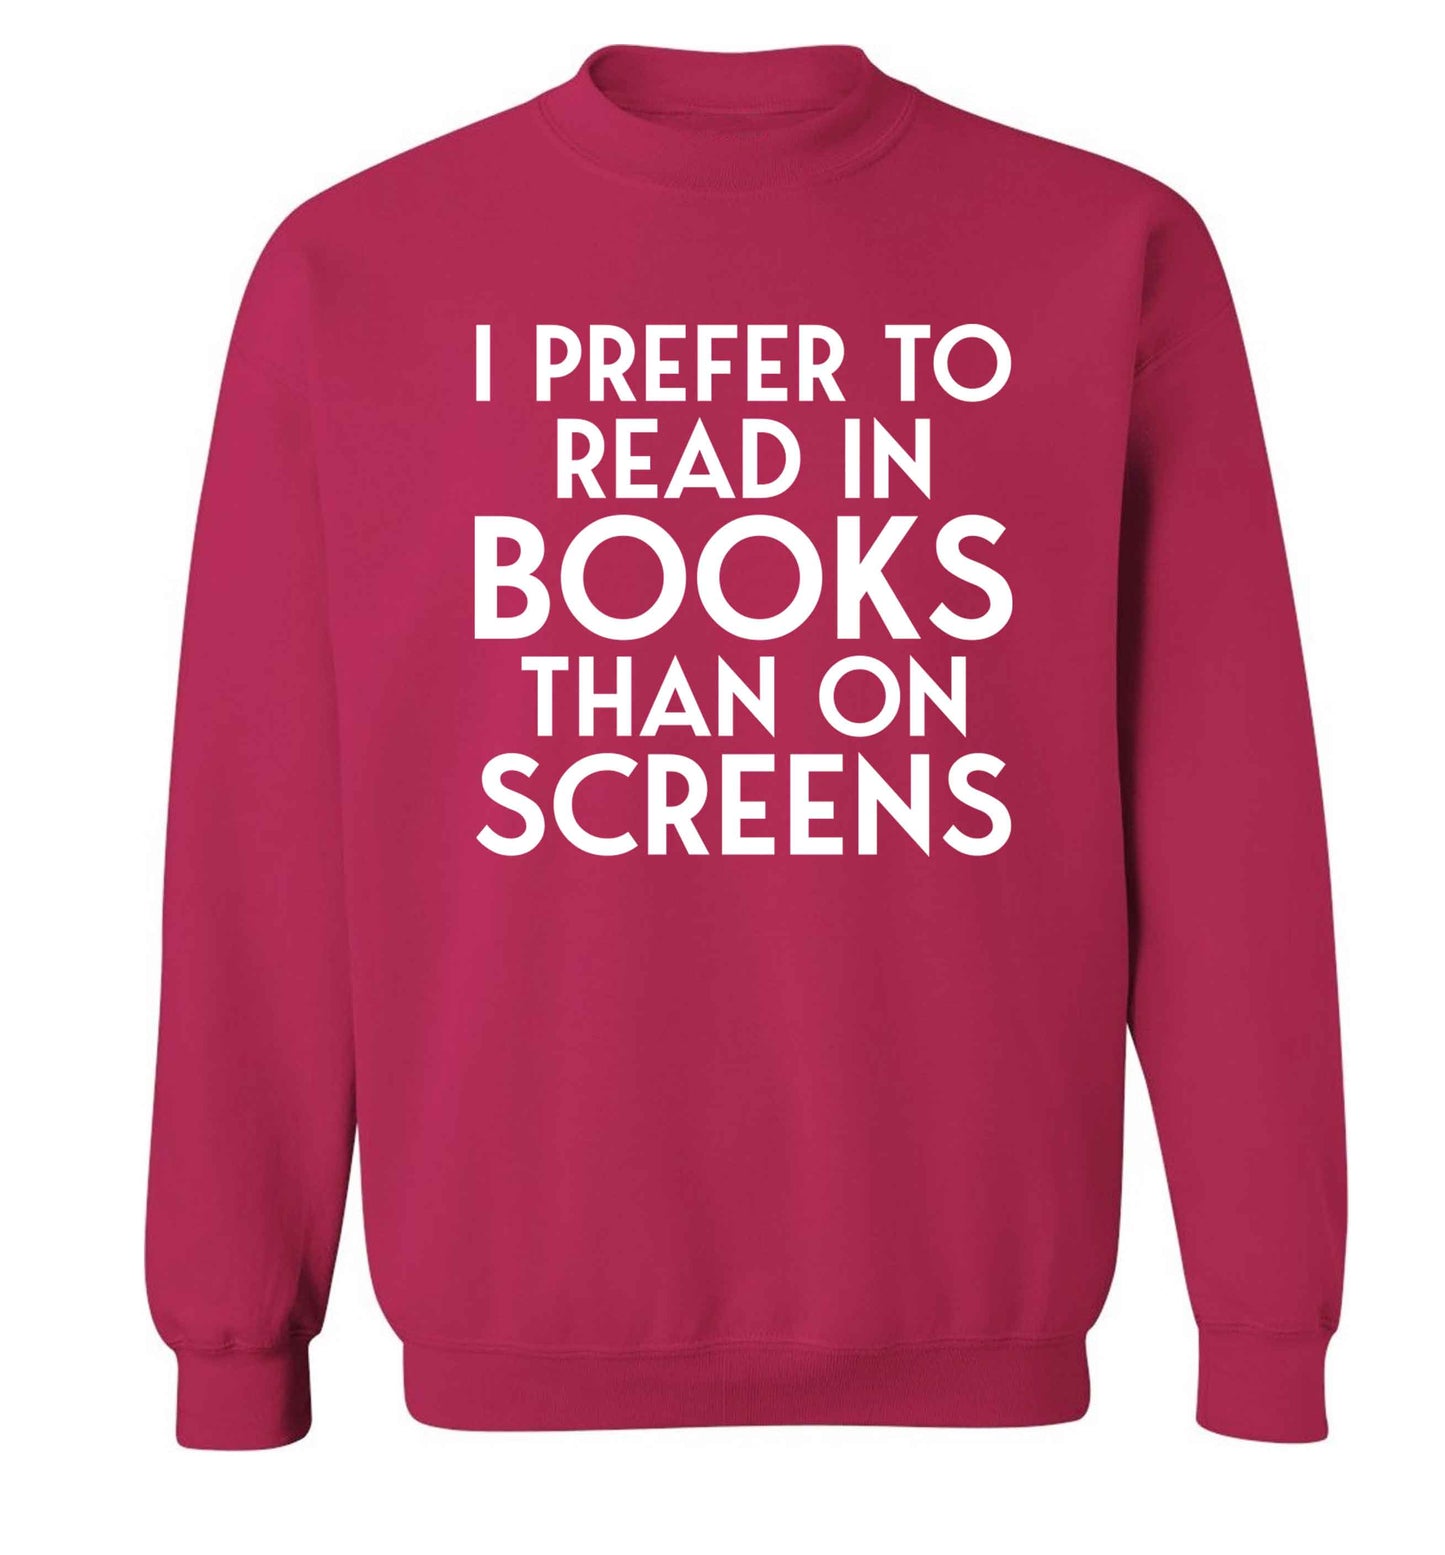 I prefer to read in books than on screens Adult's unisex pink Sweater 2XL